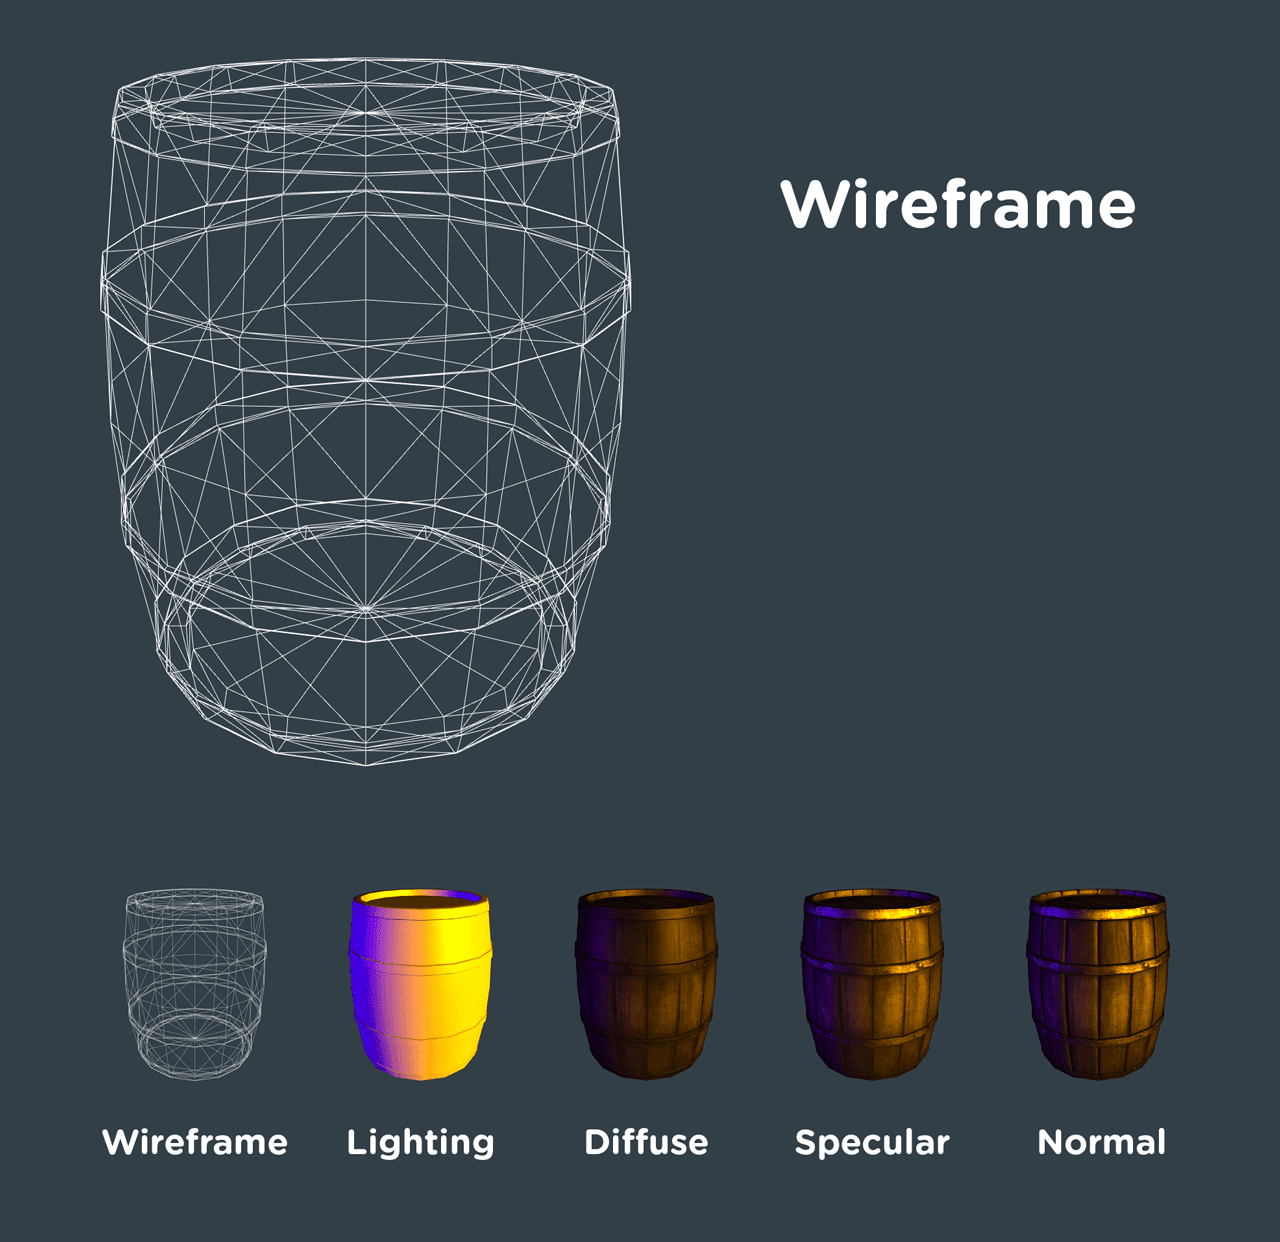 Wireframe mesh of a barrel.